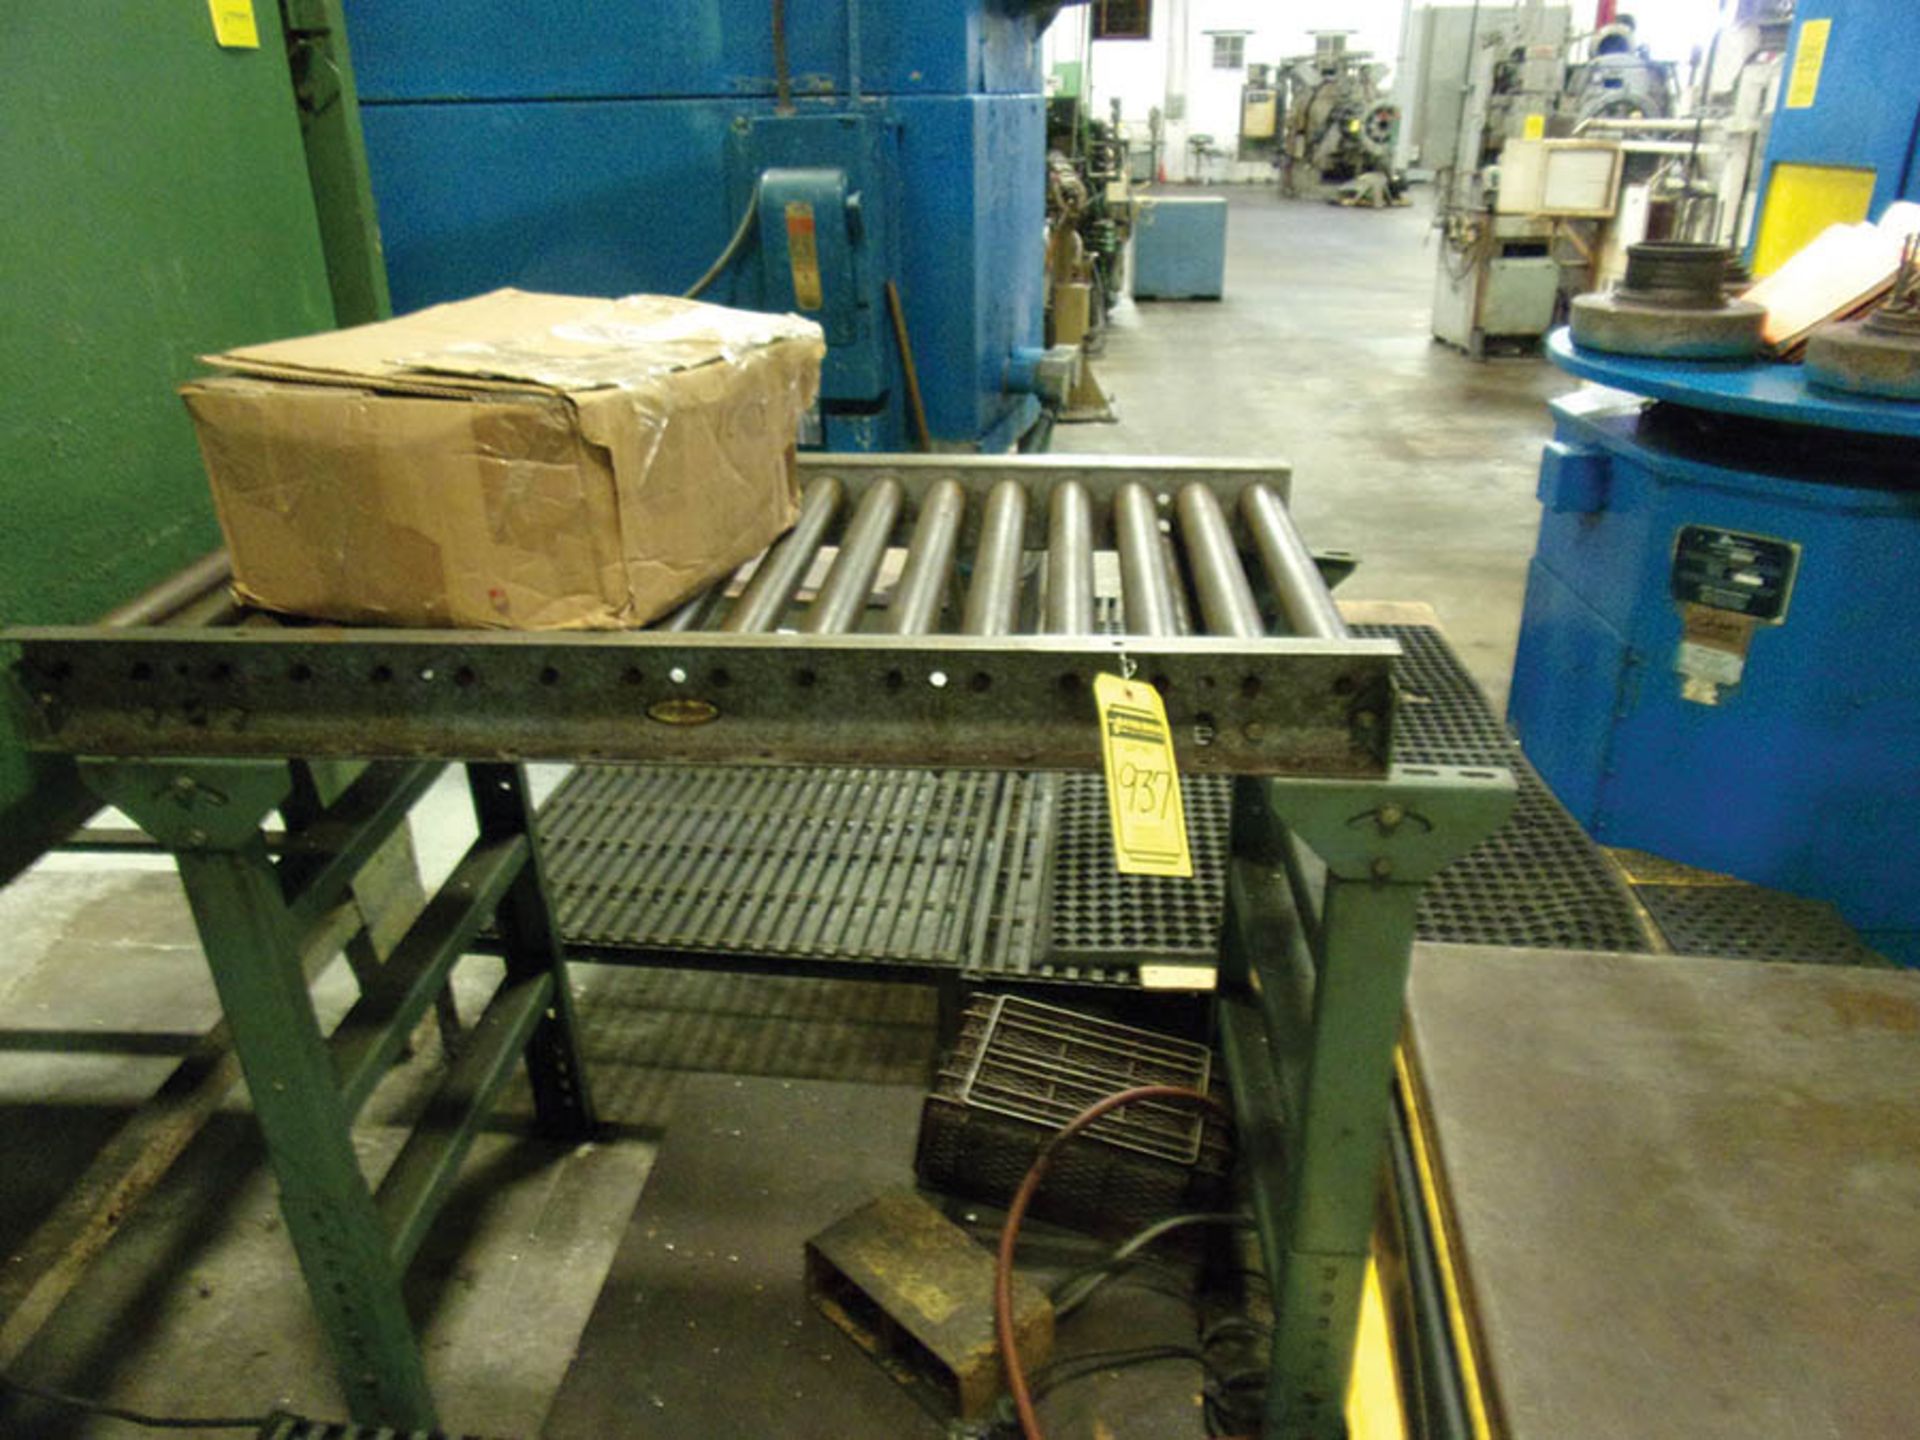 42'' X 48'' AIR LIFT TABLE, CONVEYOR, AND MACHINE WALK BOARDS - Image 2 of 3